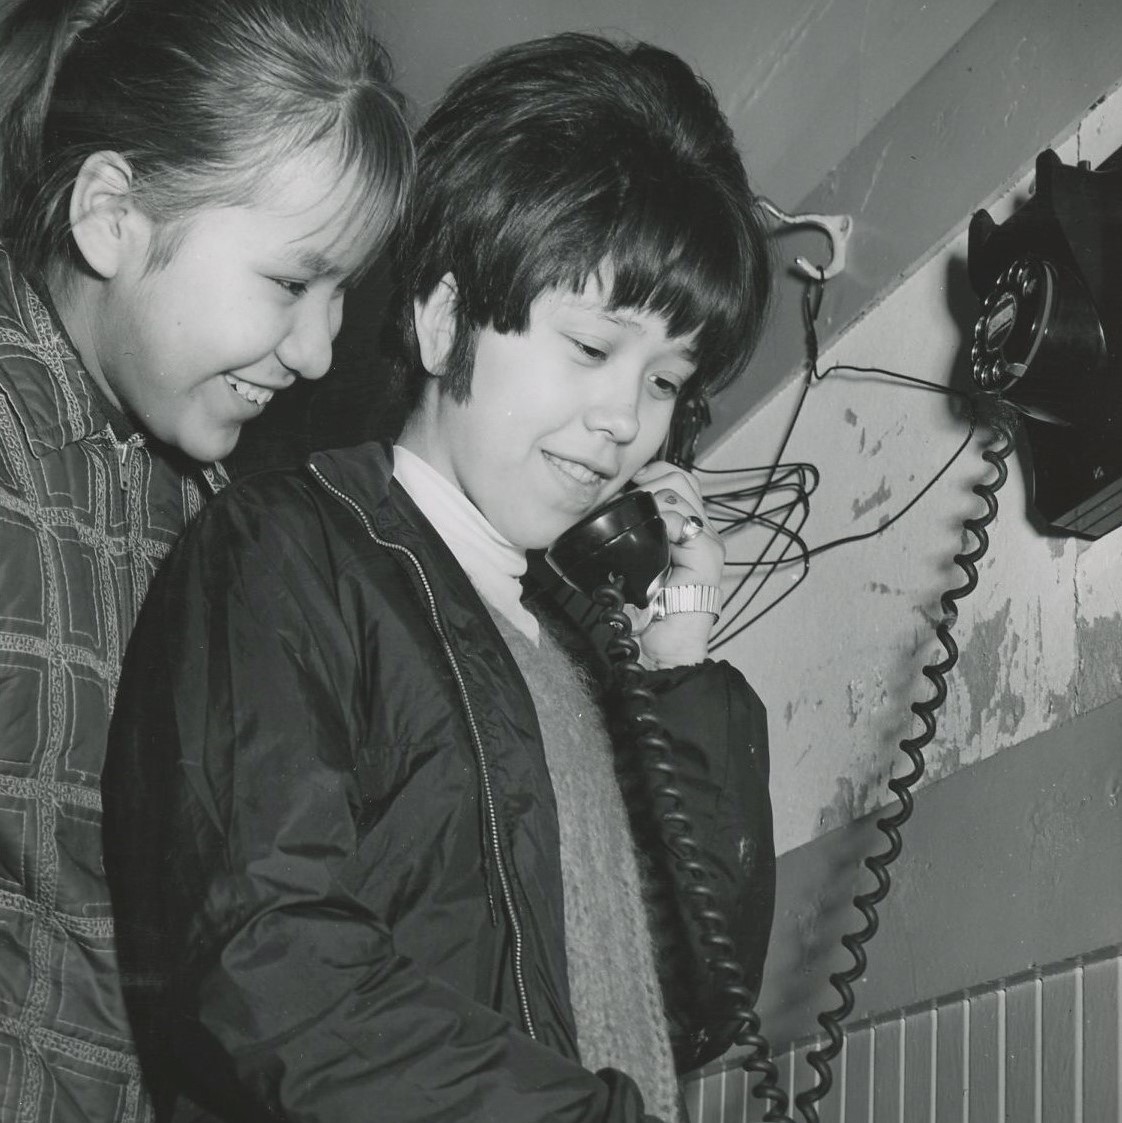 Switch and Exchange: A Brief History of Telephones in 20th Century Juneau